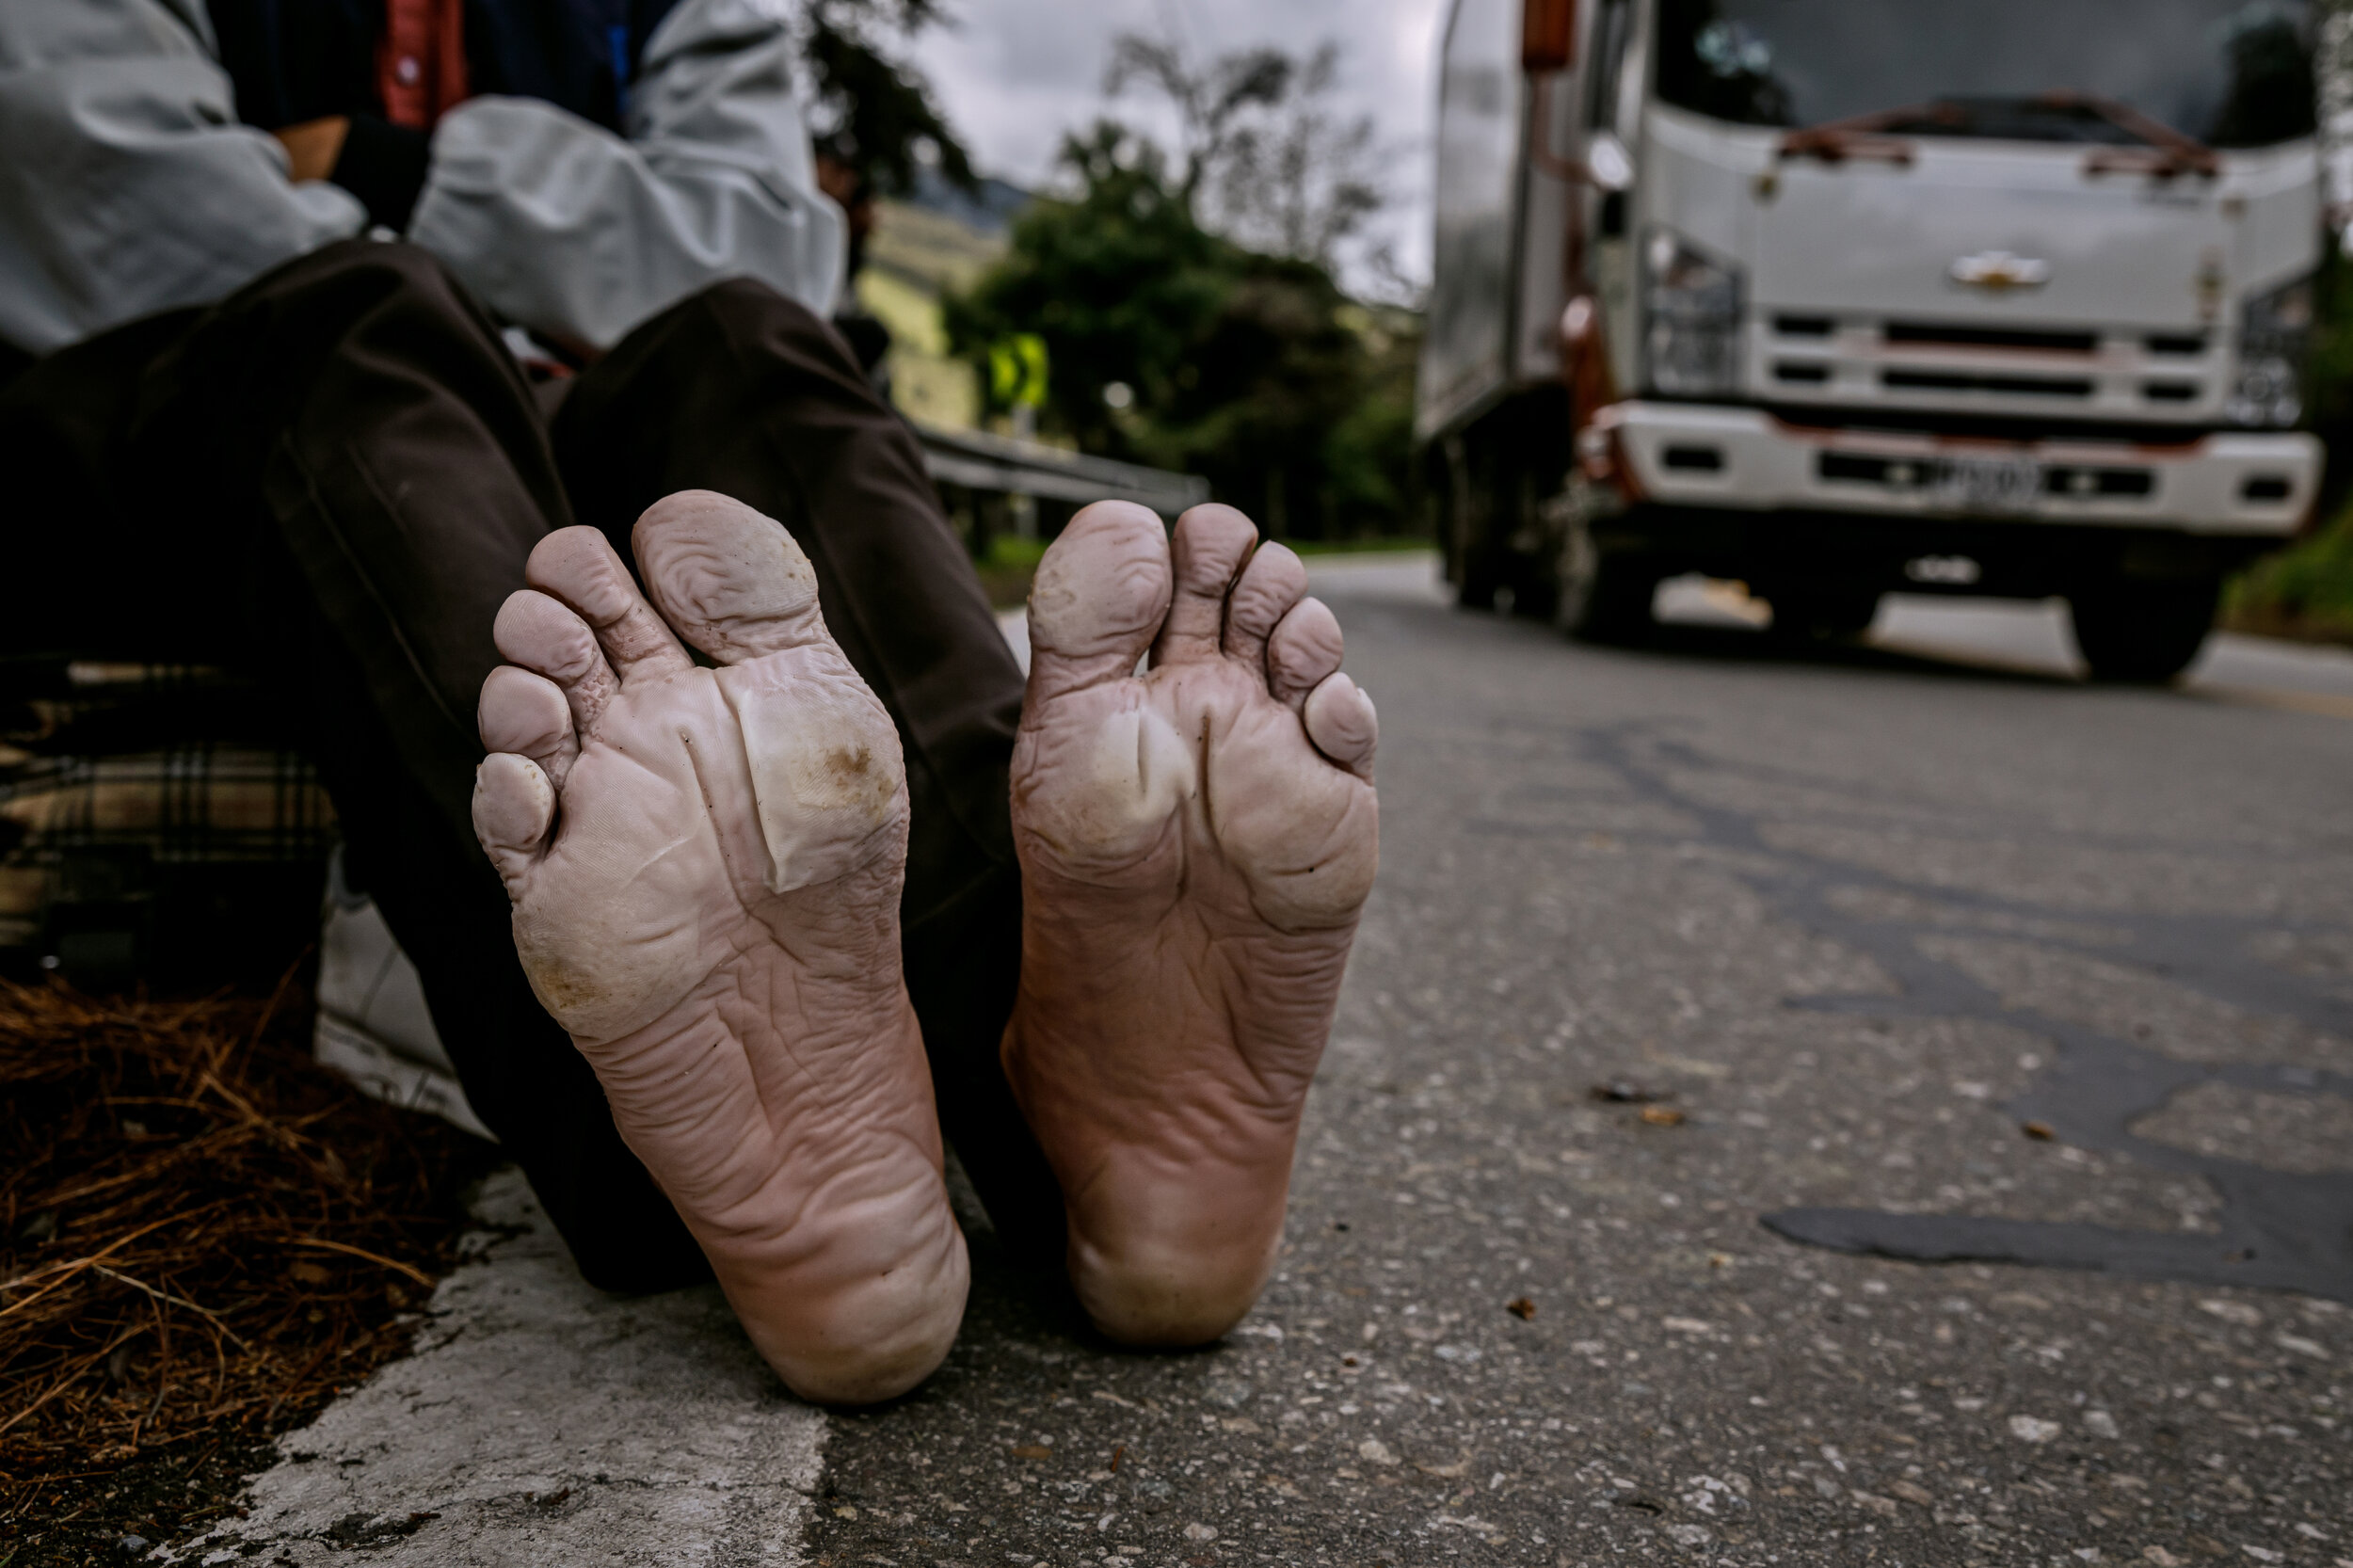  Ramon Cohil, 33, stretches his legs and airs out his feet covered entirely in a layer of dead skin, near La Laguna, Colombia. The caminantes, or walkers, have to make a perilous 120-mile journey on that climbs more than 9,000 feet to a long and frig